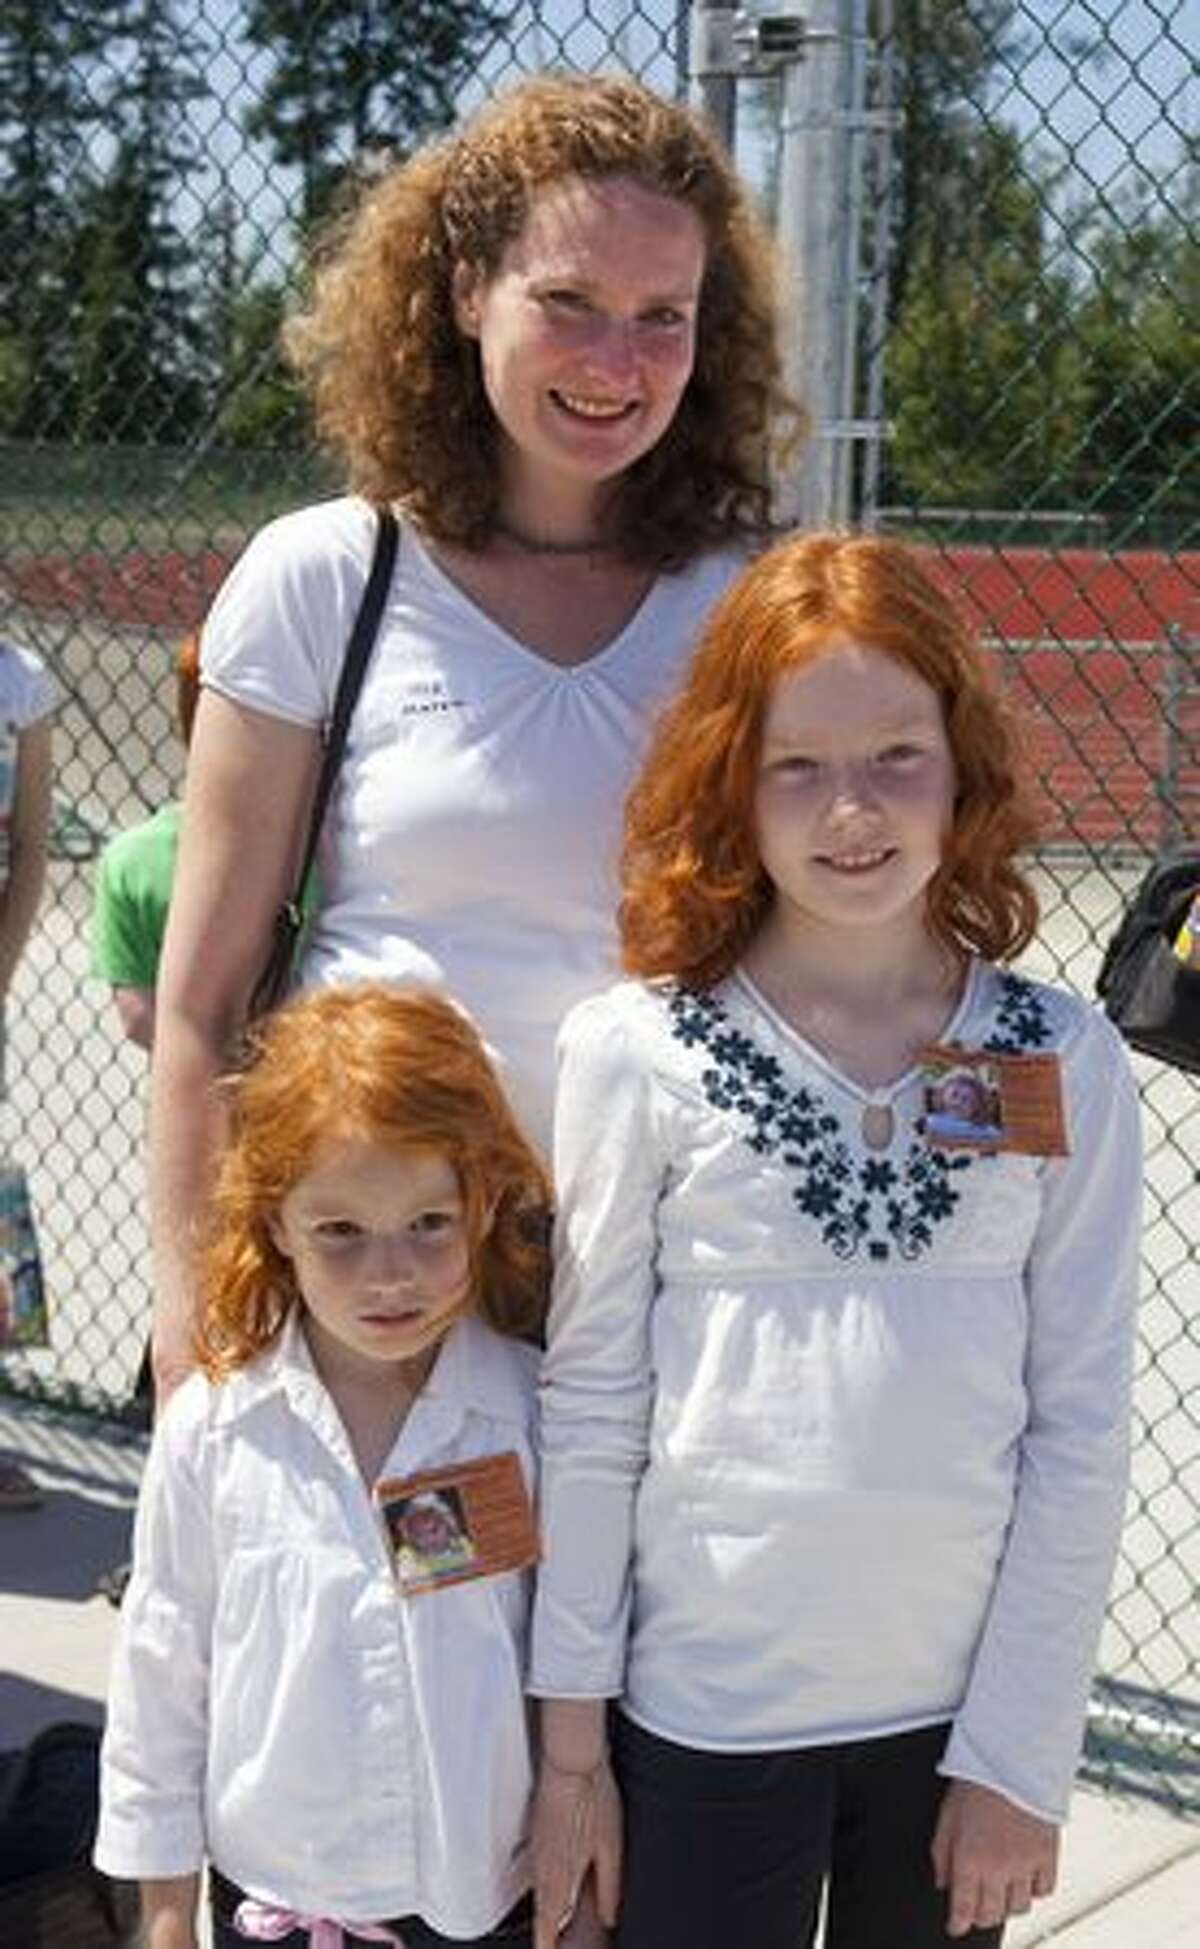 Lisann, 4, Laura, 9 and Maren Draeger were visiting from Germany and decided to participate in Redheads and More Redheads Day.